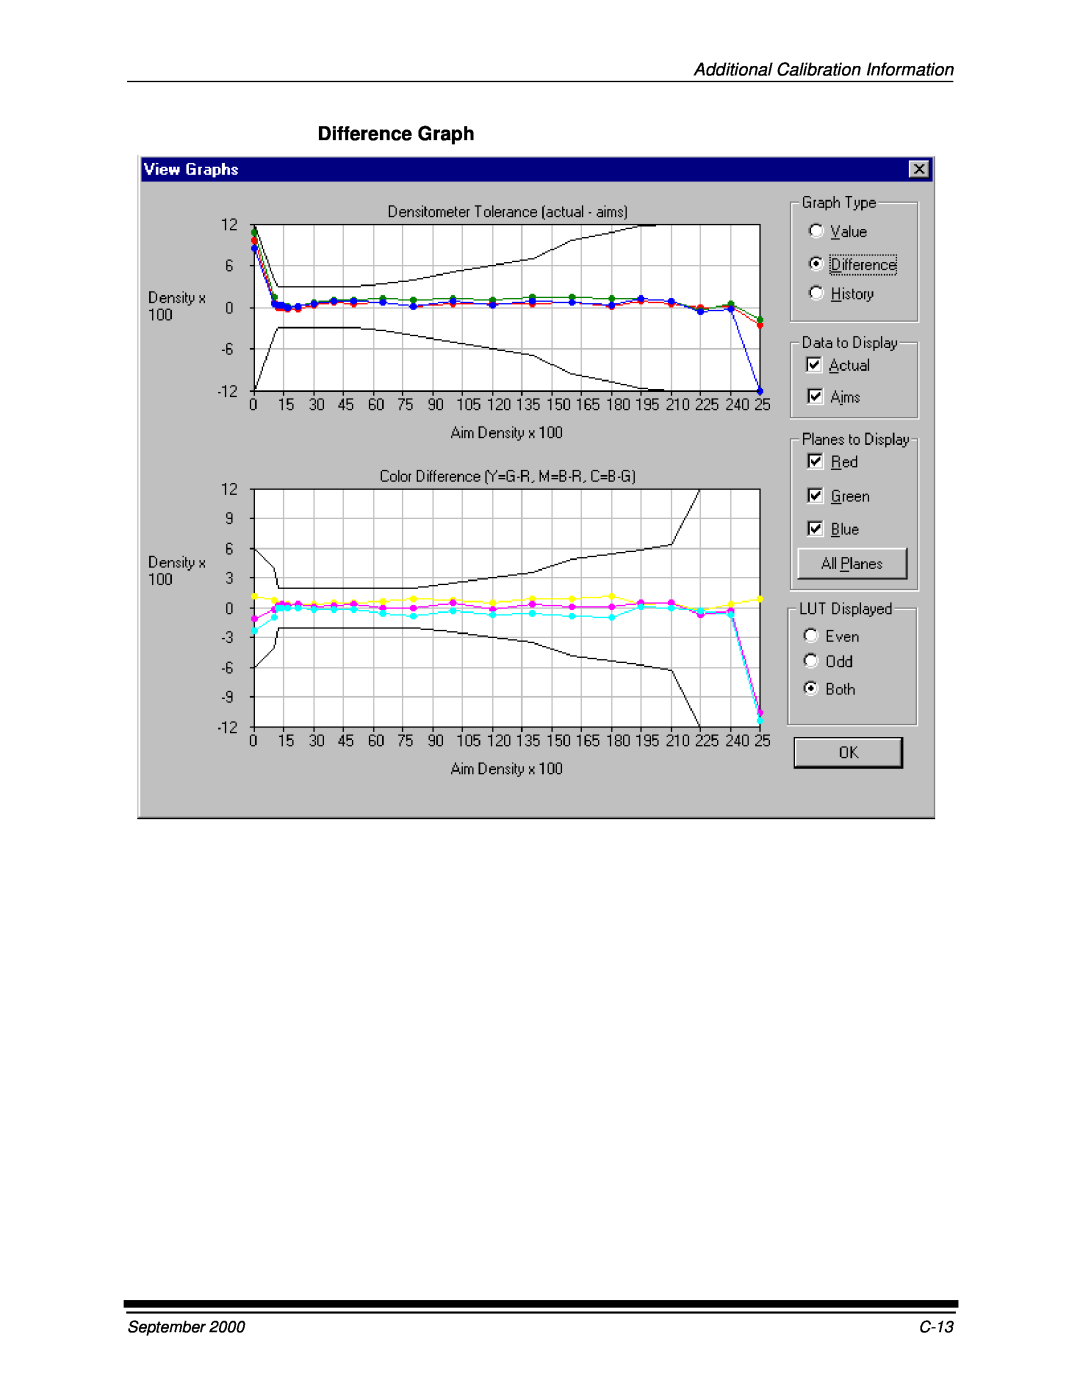 Kodak 20R manual Difference Graph, Additional Calibration Information, September, C-13 